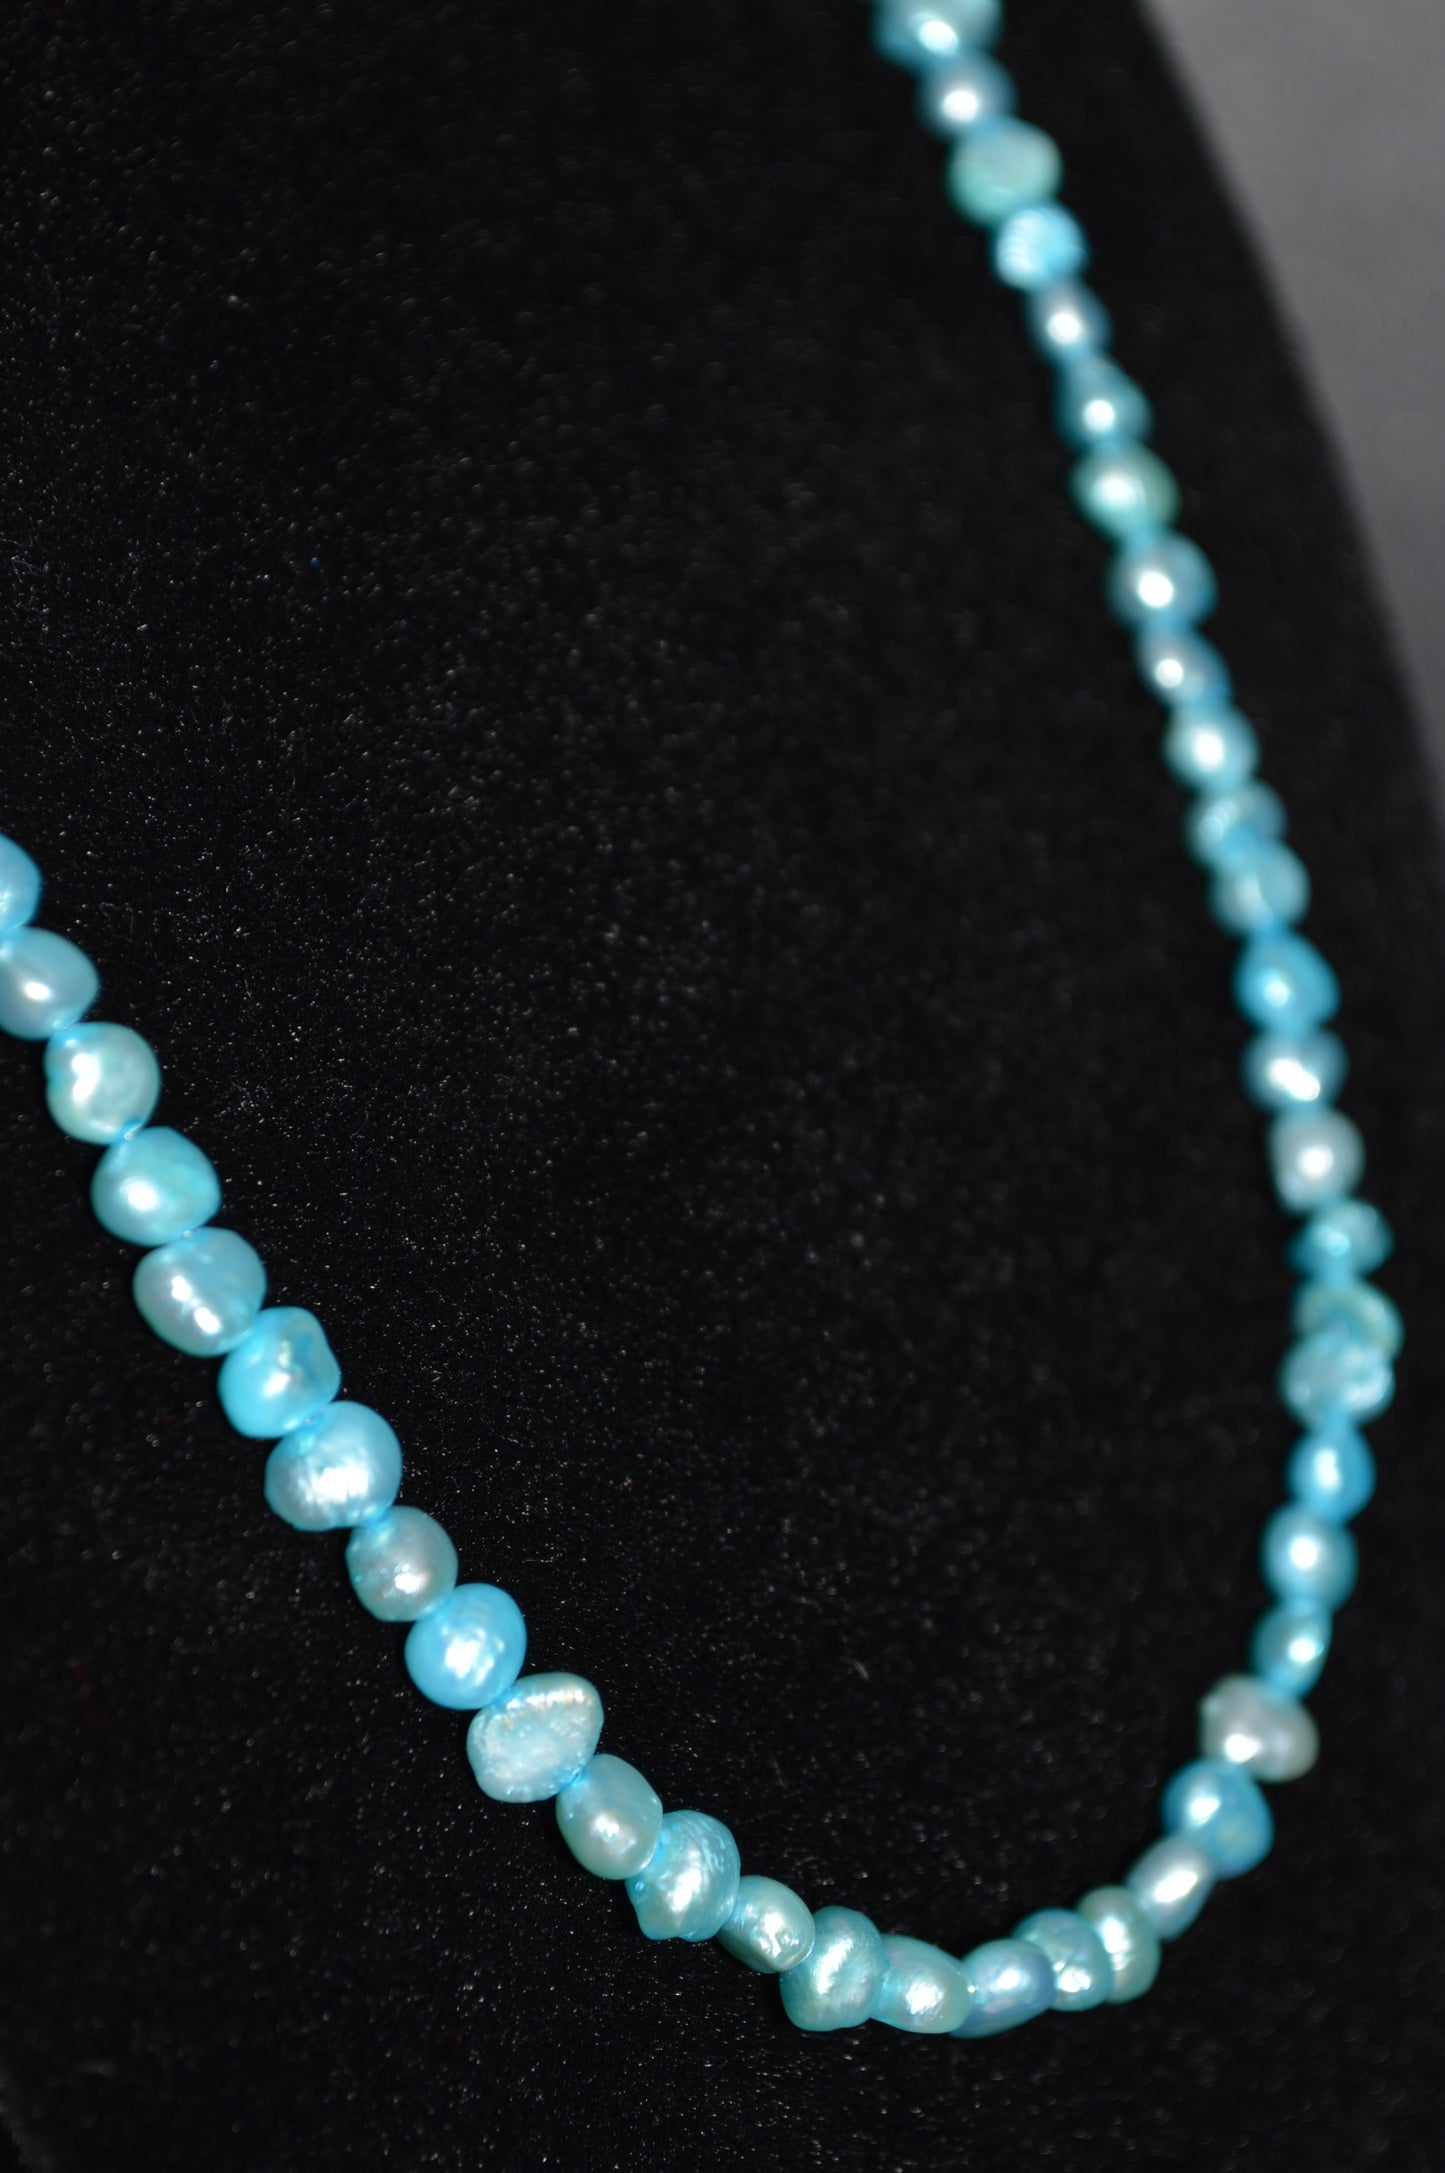 Freshwater Cultured Pearl Necklace and Earring Set (Teal Blue)